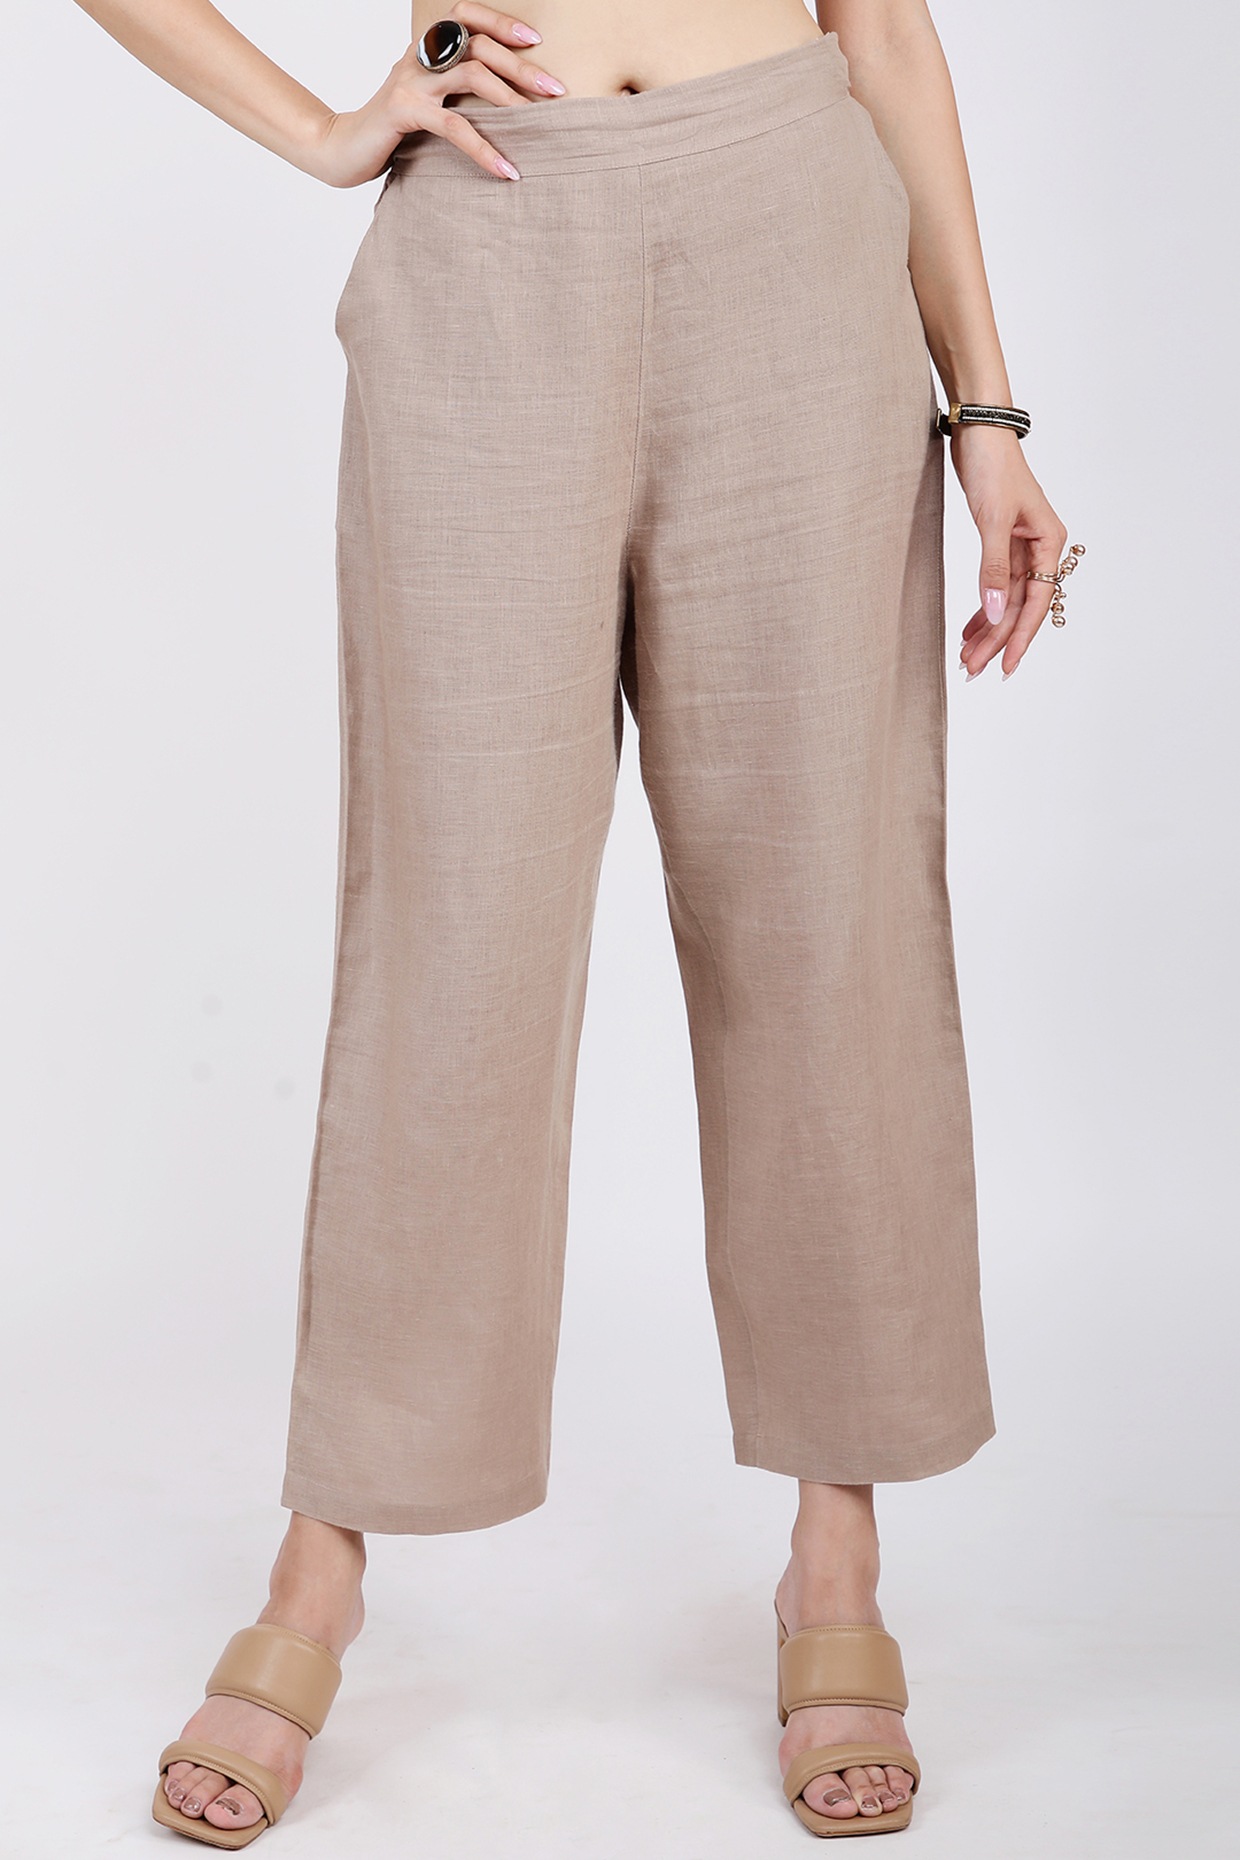 Buy ANIIQ Off White Women's Beautiful And Elegant Linen Pearl Palazzo  Trousers at Amazon.in